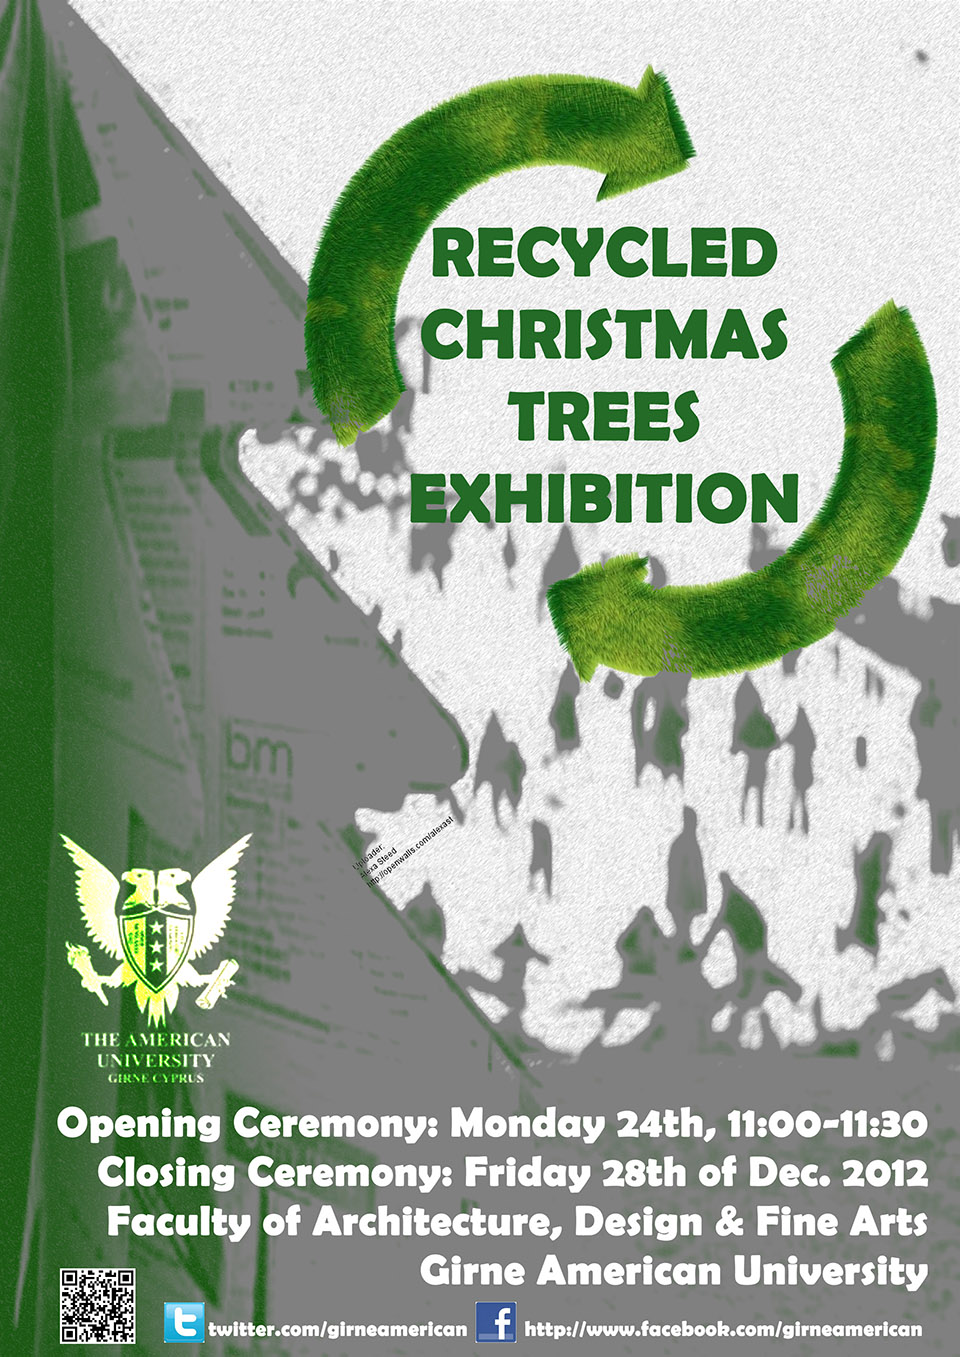 “RECYCLED CHRISTMAS TREES” EXHIBITION